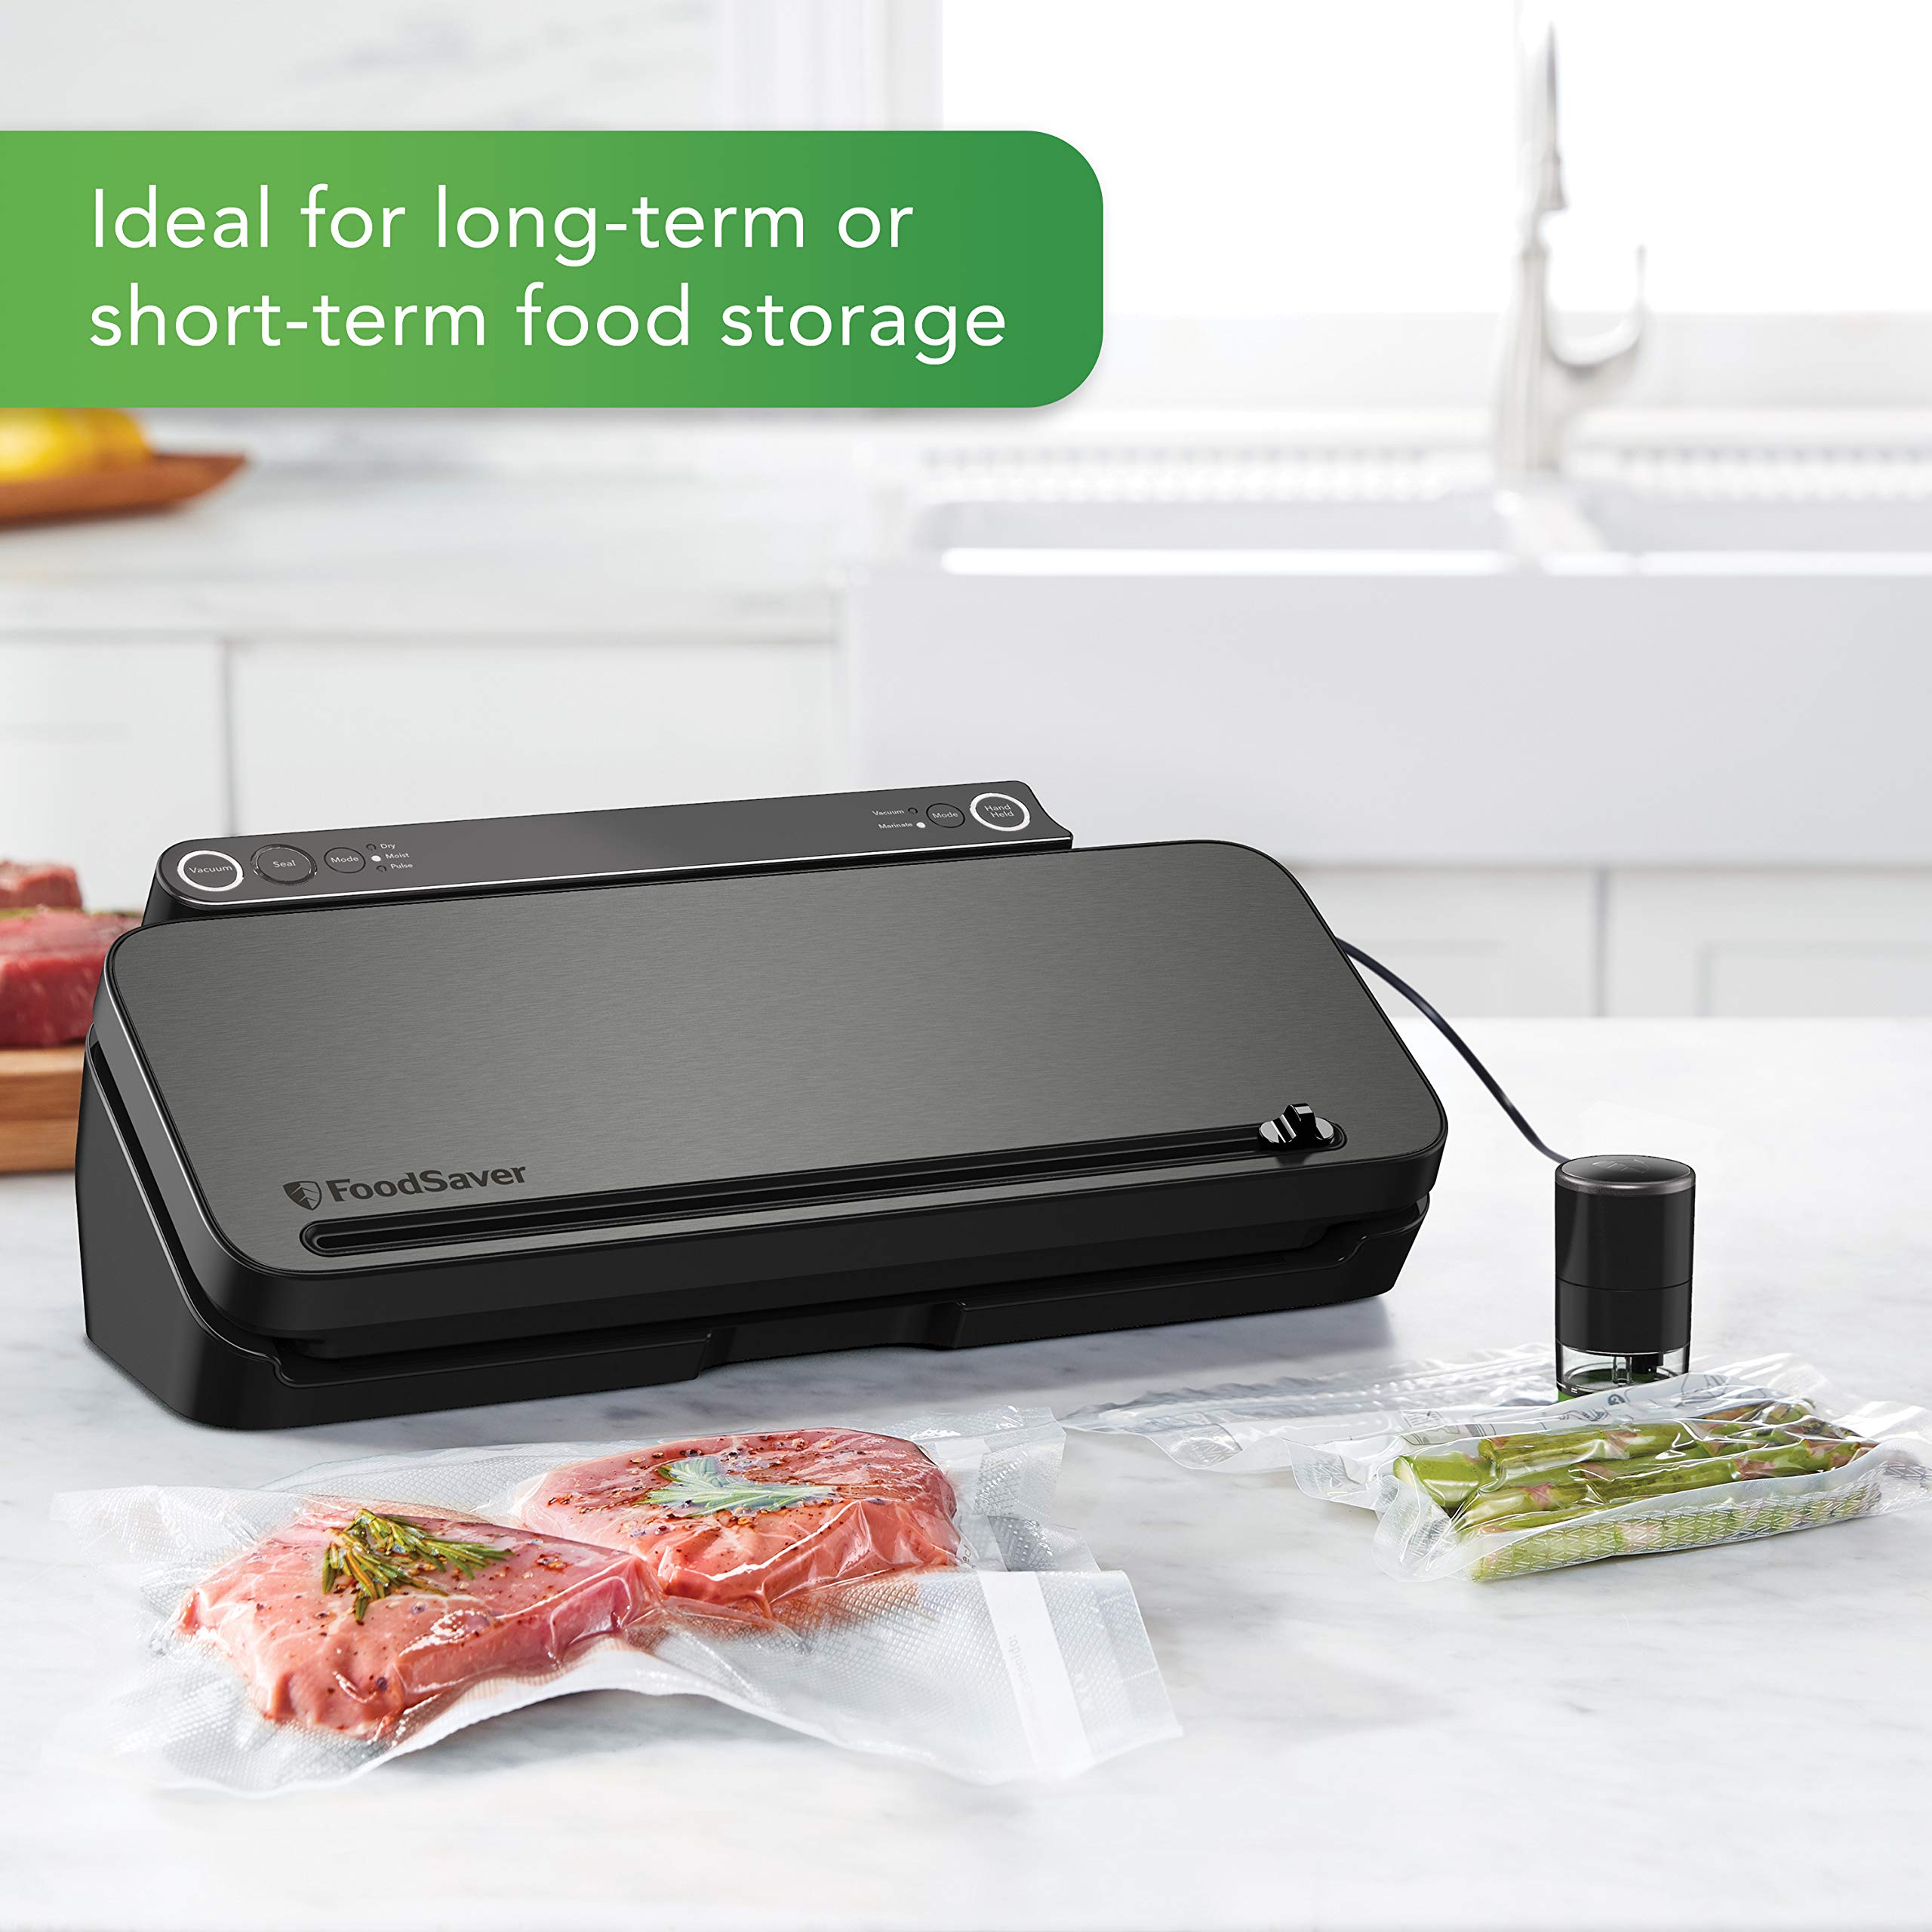 FoodSaver VS3150 Multi Use Vacuum Sealing Food Preservation System with Additional Roll Charcoal Stainless Steel Black - image 3 of 7